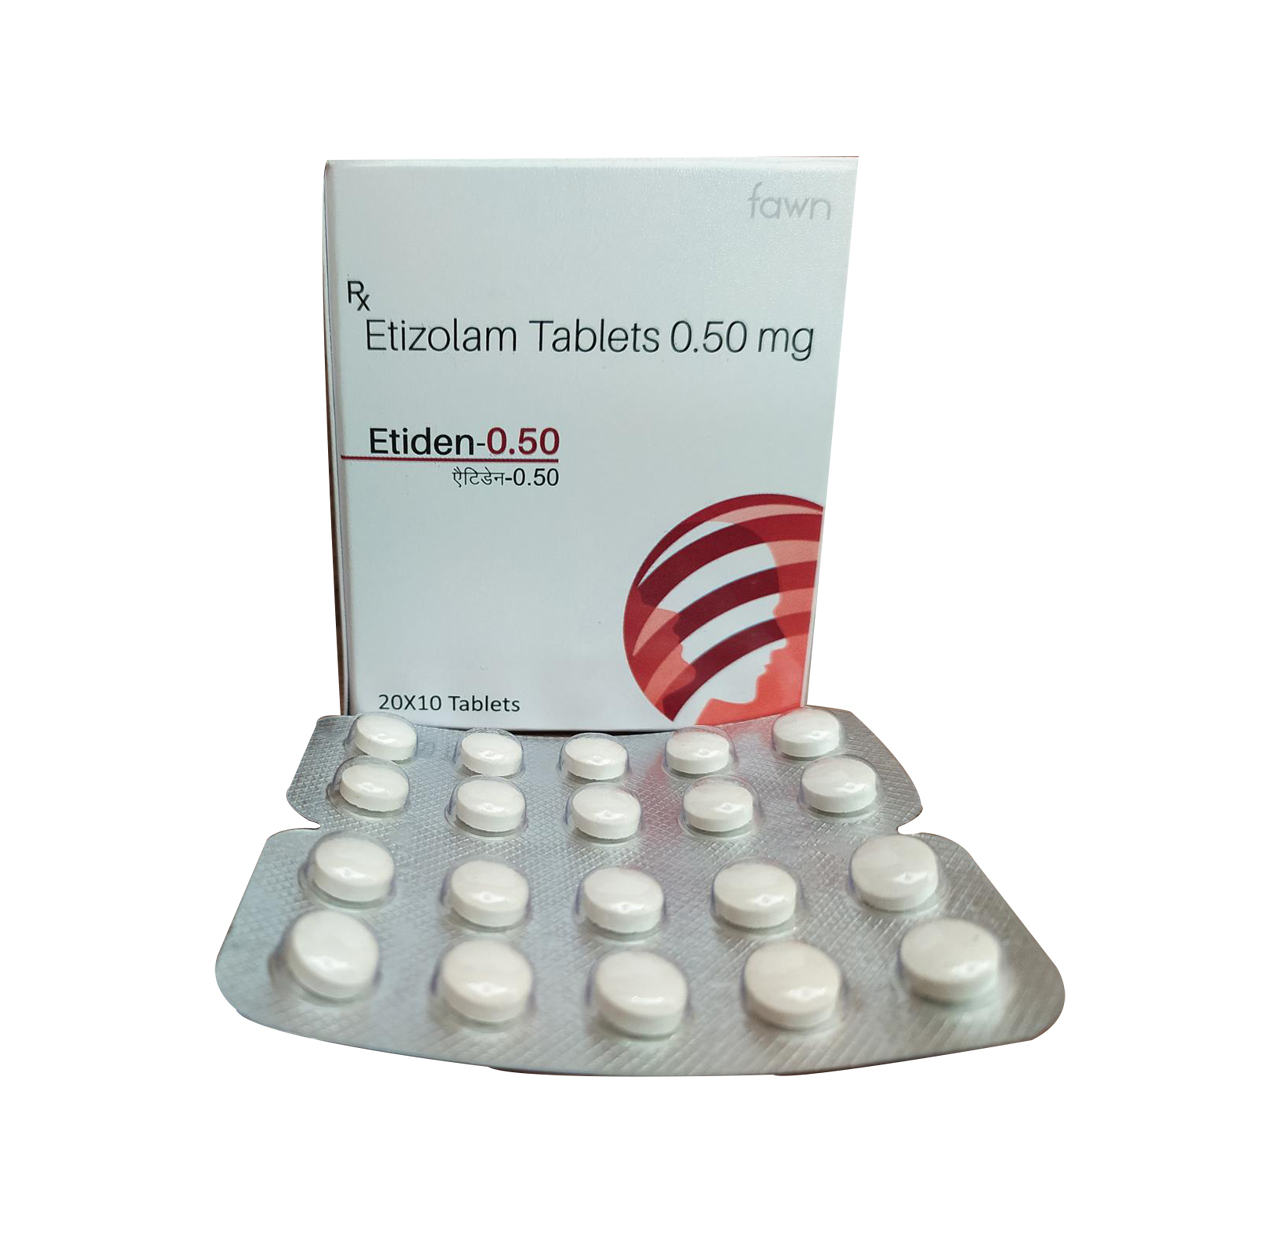 Product Name: ETIDEN 0.50, Compositions of ETIDEN 0.50 are Etizolam 0.5mg - Fawn Incorporation